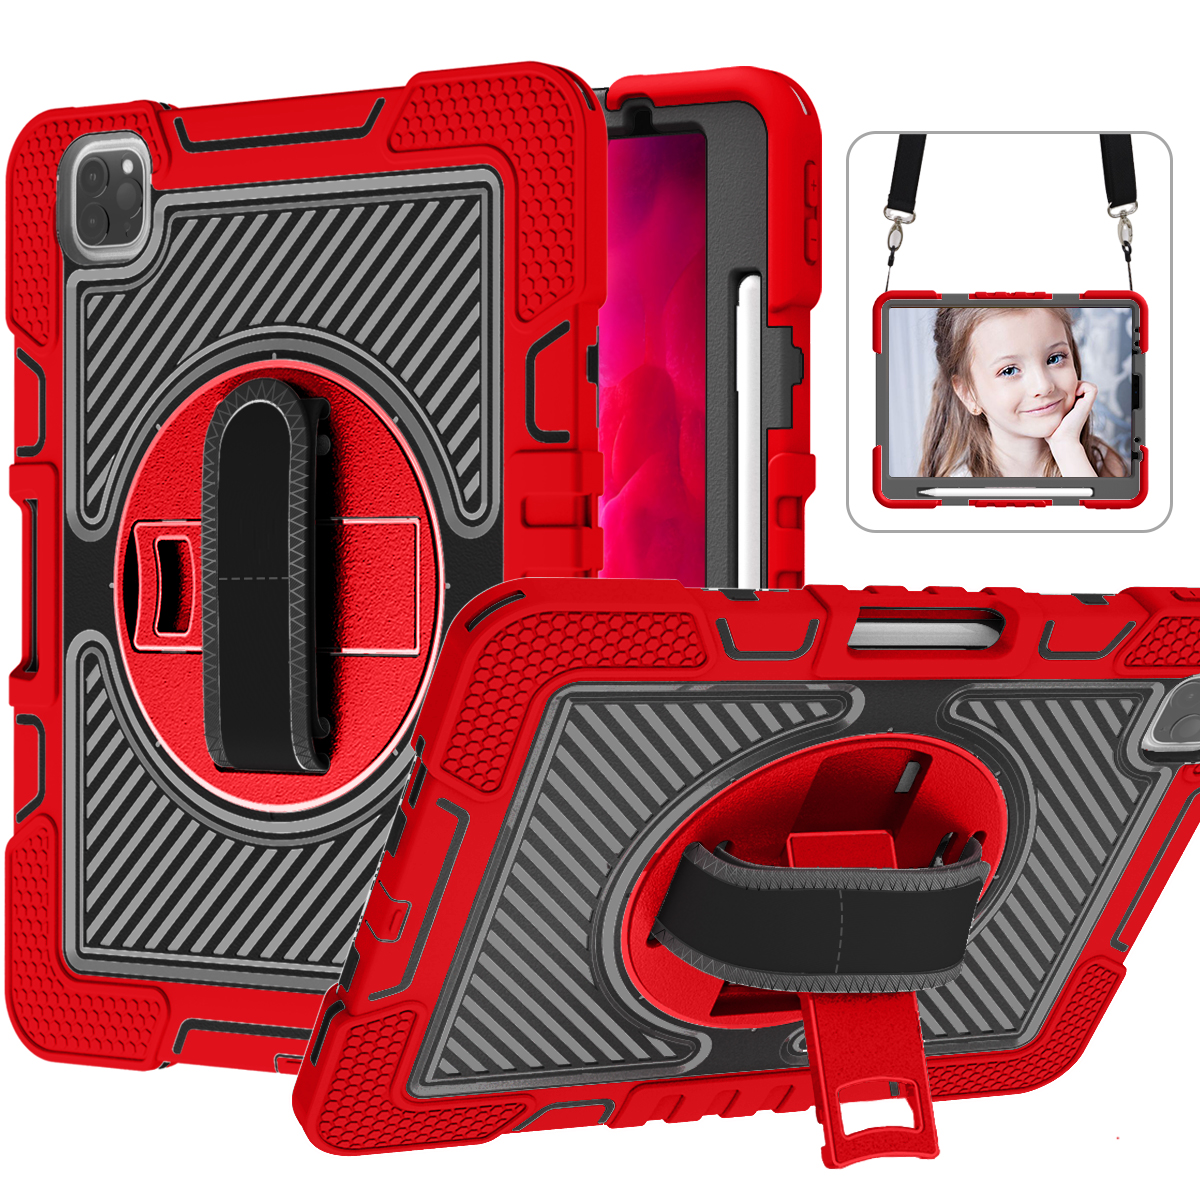 3 Layer Heavy Duty Hybrid Drop Protection Case with 360 Rotating Stand Hand Strap Shoulder